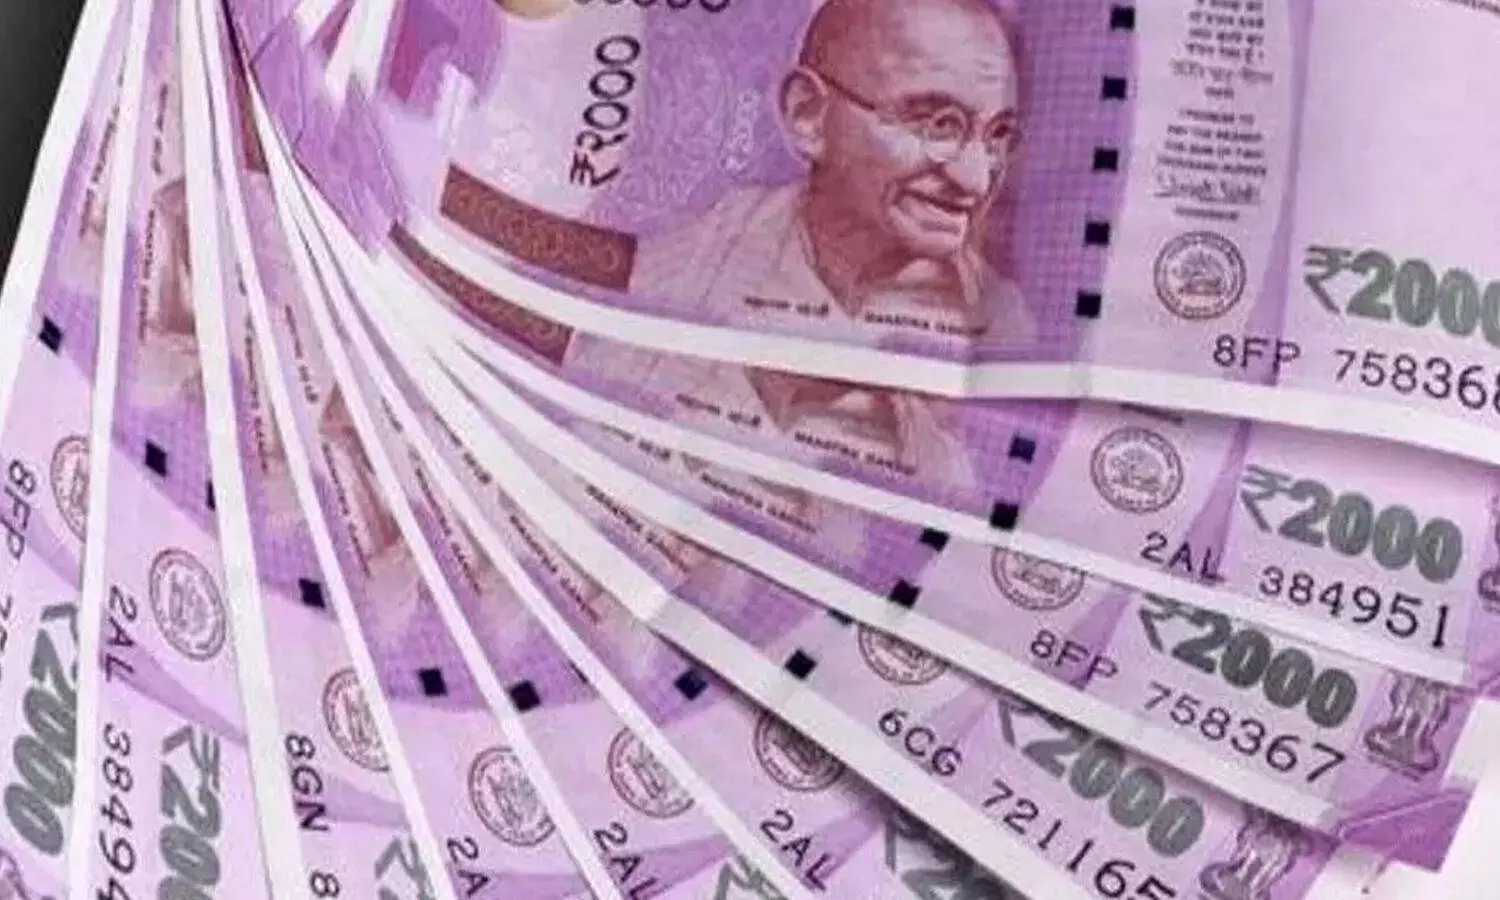 76 pc Rs 2,000 notes returned to banks since withdrawal: RBI